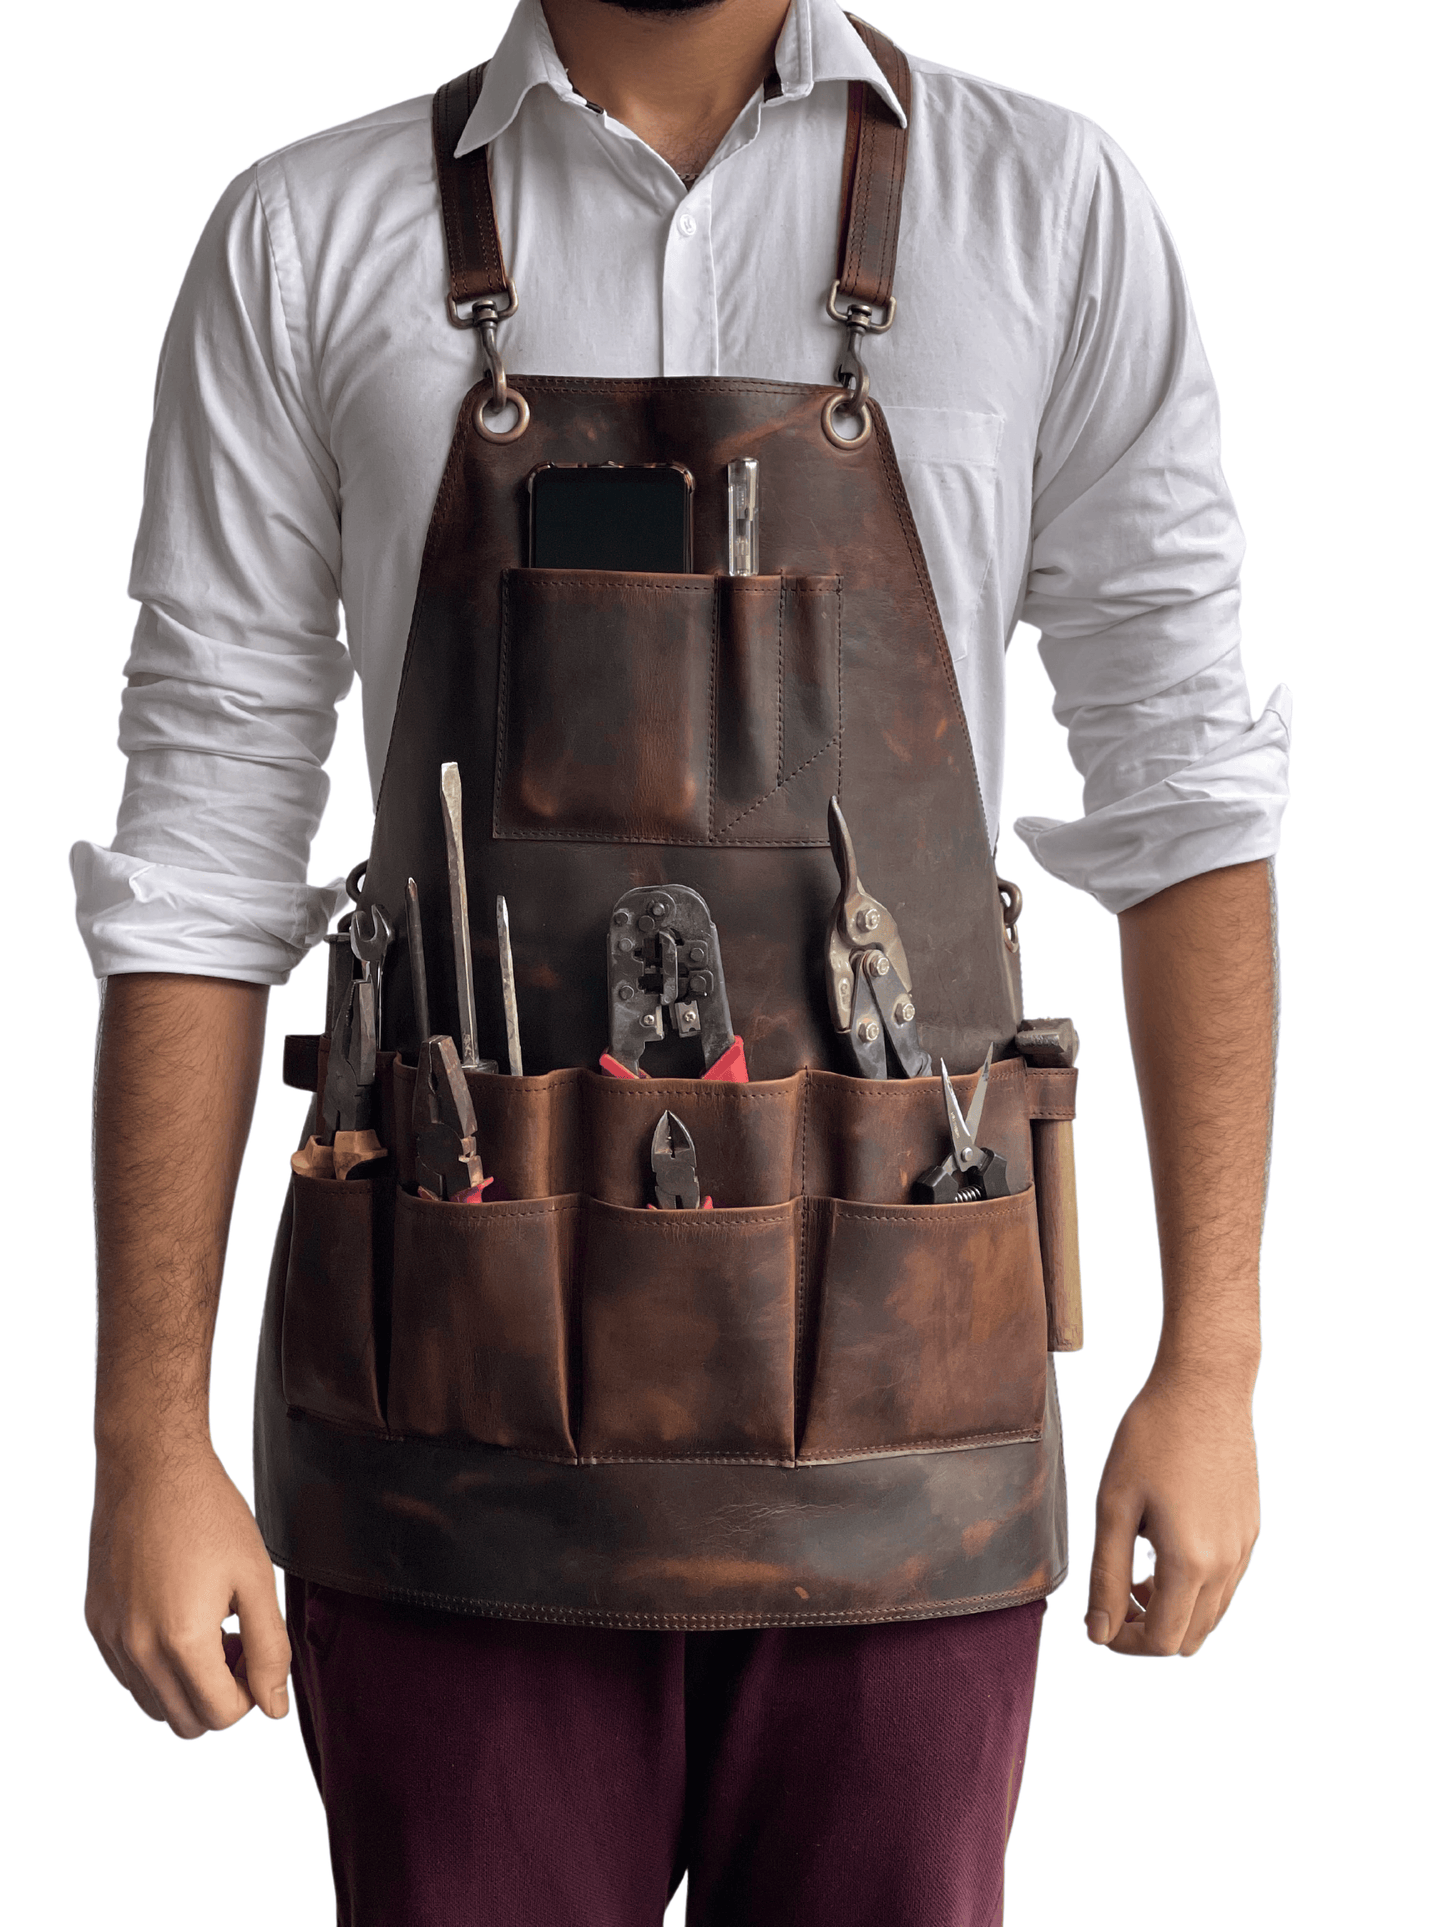 Leather Apron with 12 Tool Pockets Heat & Flame Resistant Heavy Duty Tool Apron